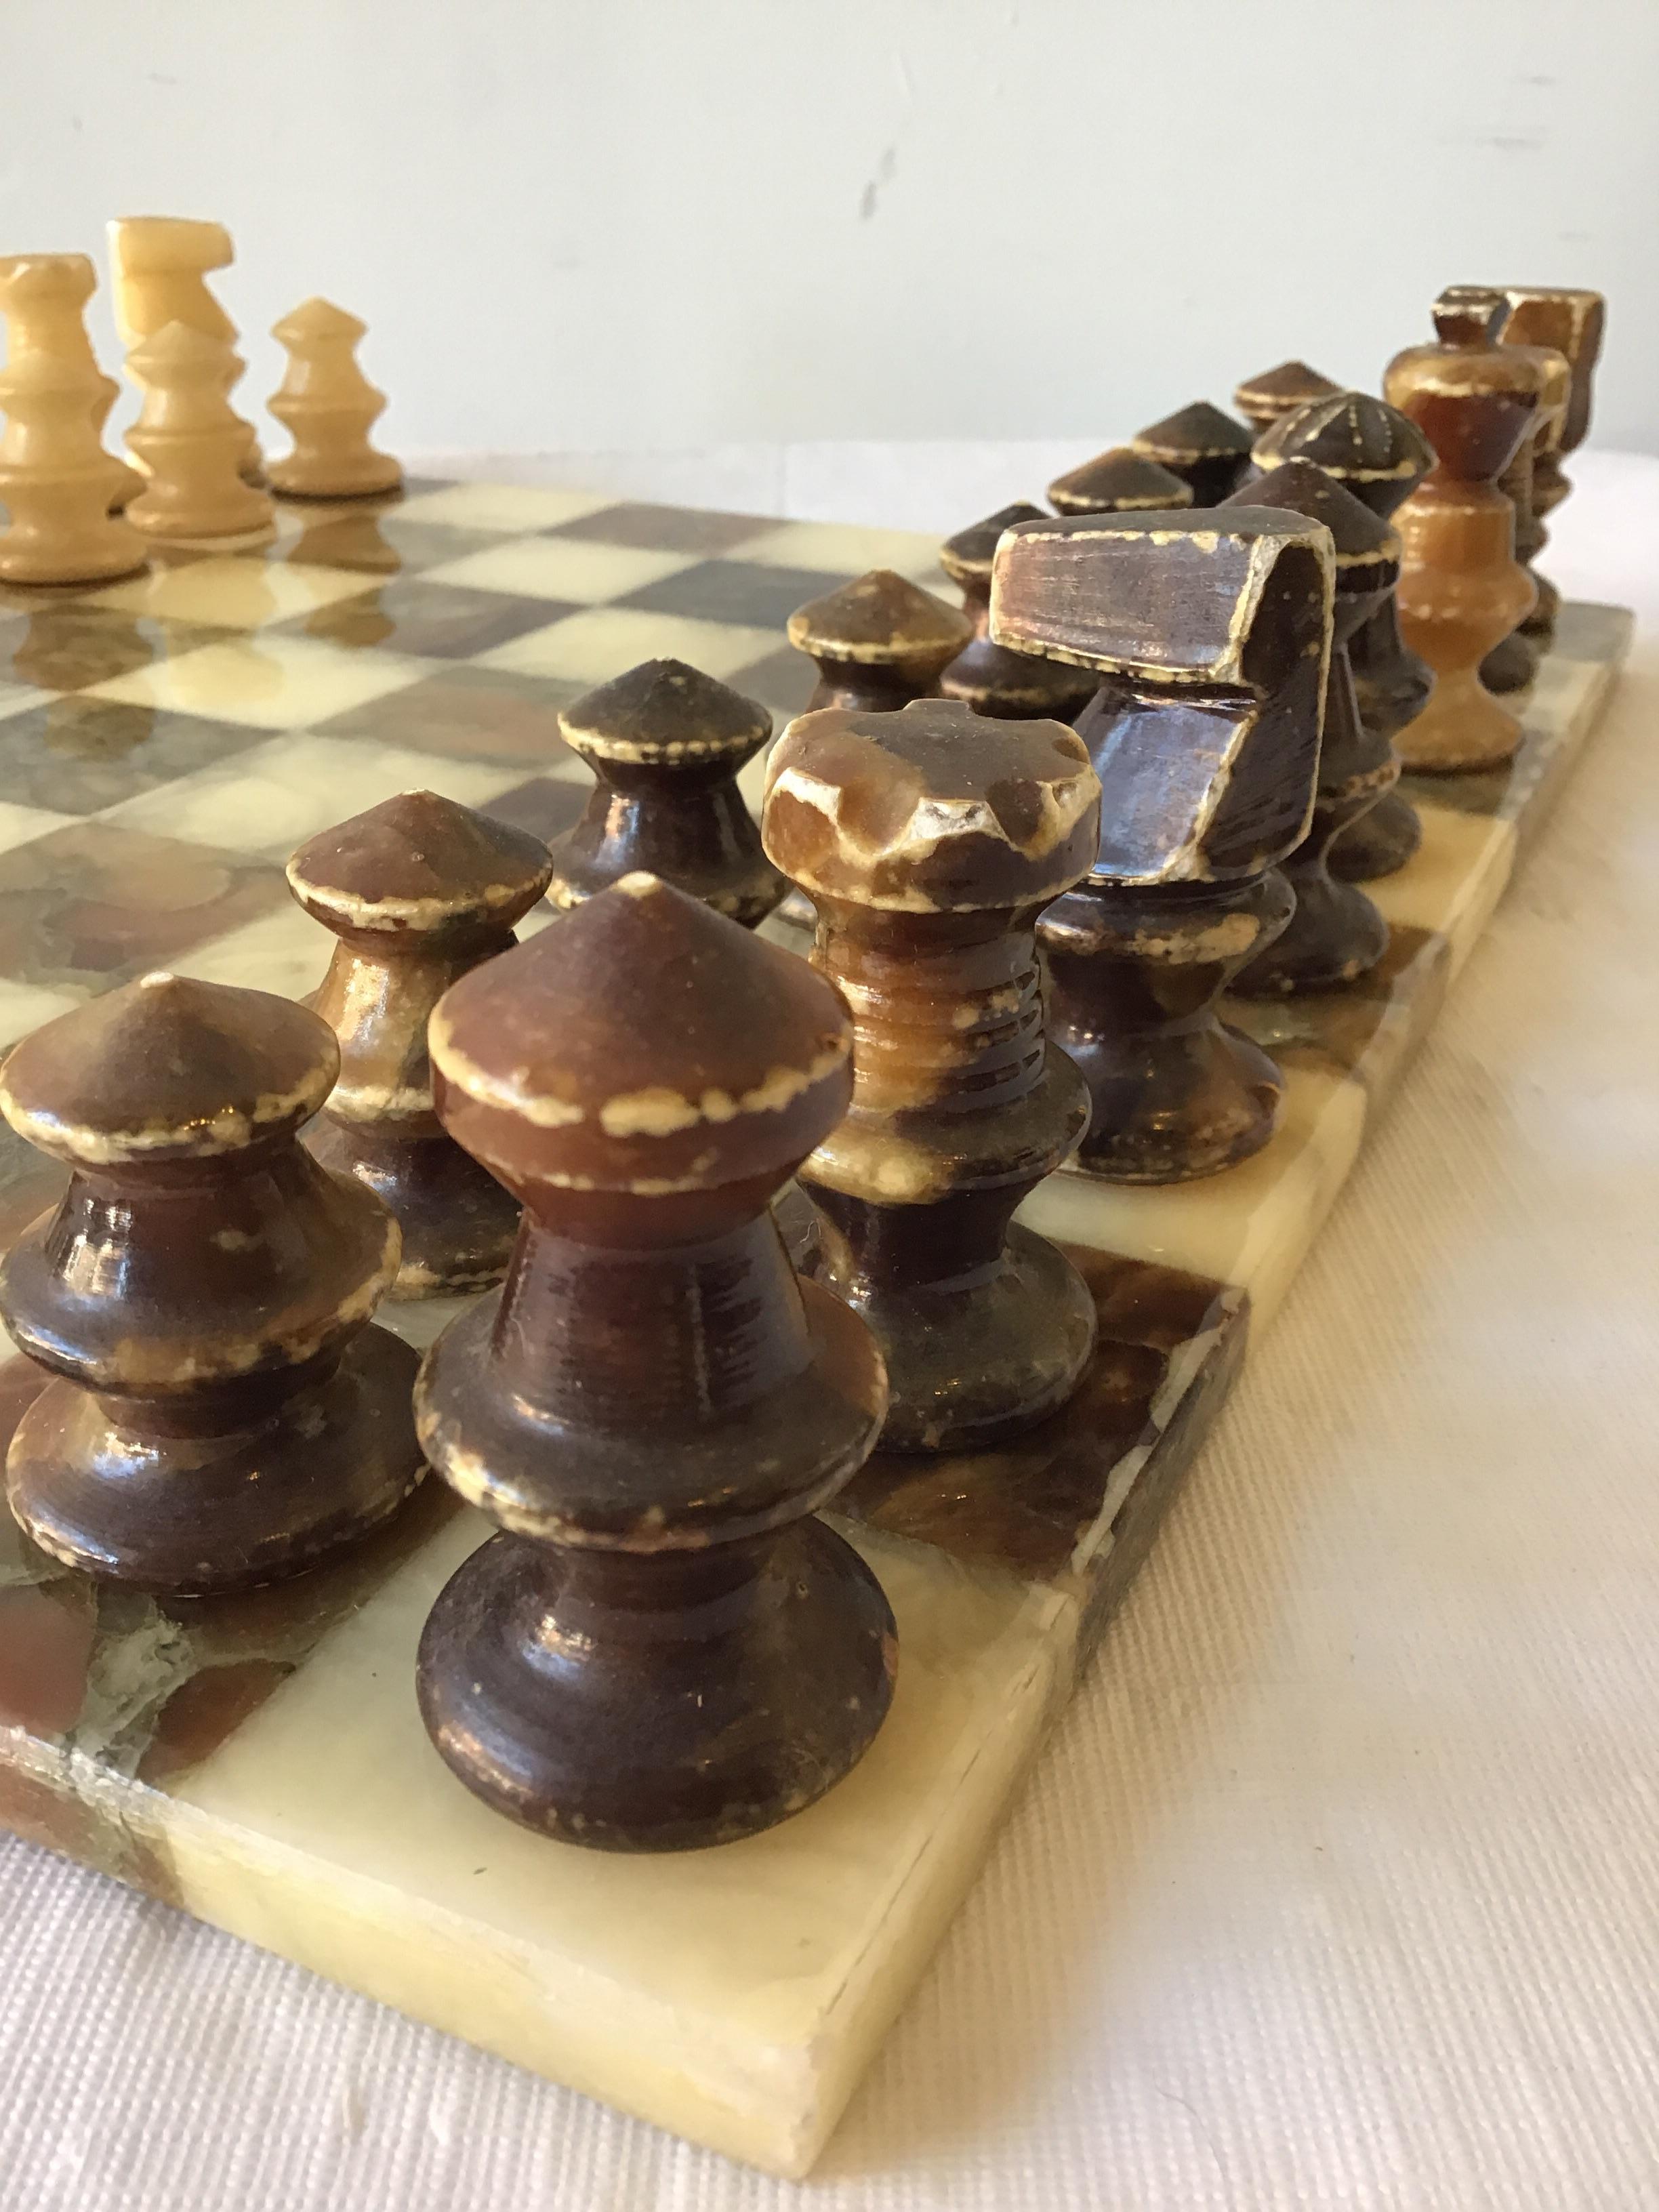 1960s marble chess set.